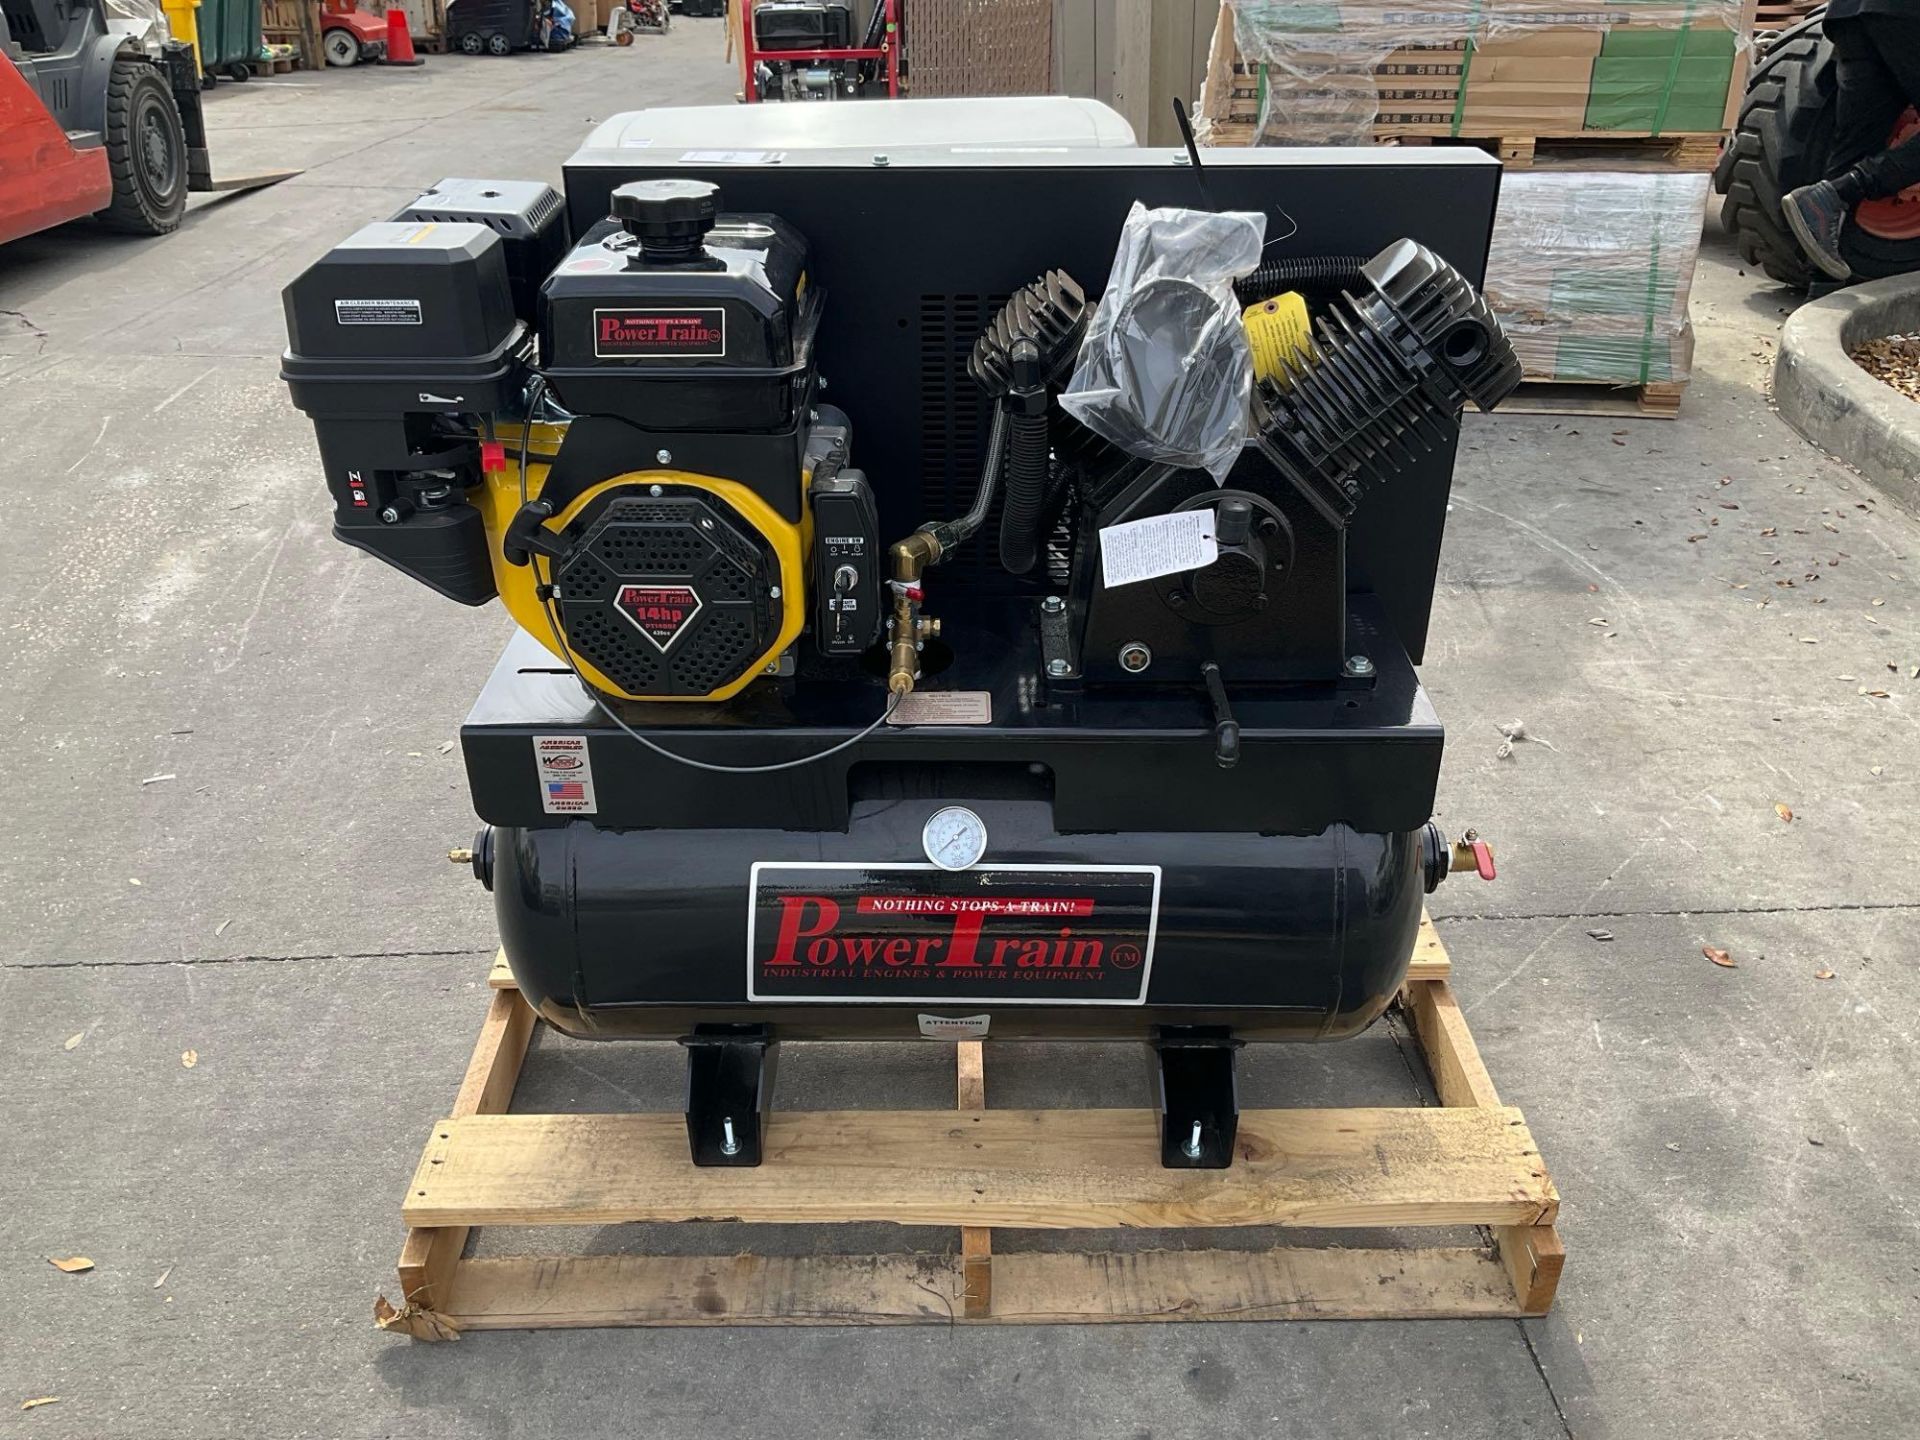 UNUSED POWER TRAIN AIR COMPRESSOR MODEL PT-14G30TRKE-V2, GAS POWERED, APPROX 175 MAX RATED PSI, A... - Image 2 of 12